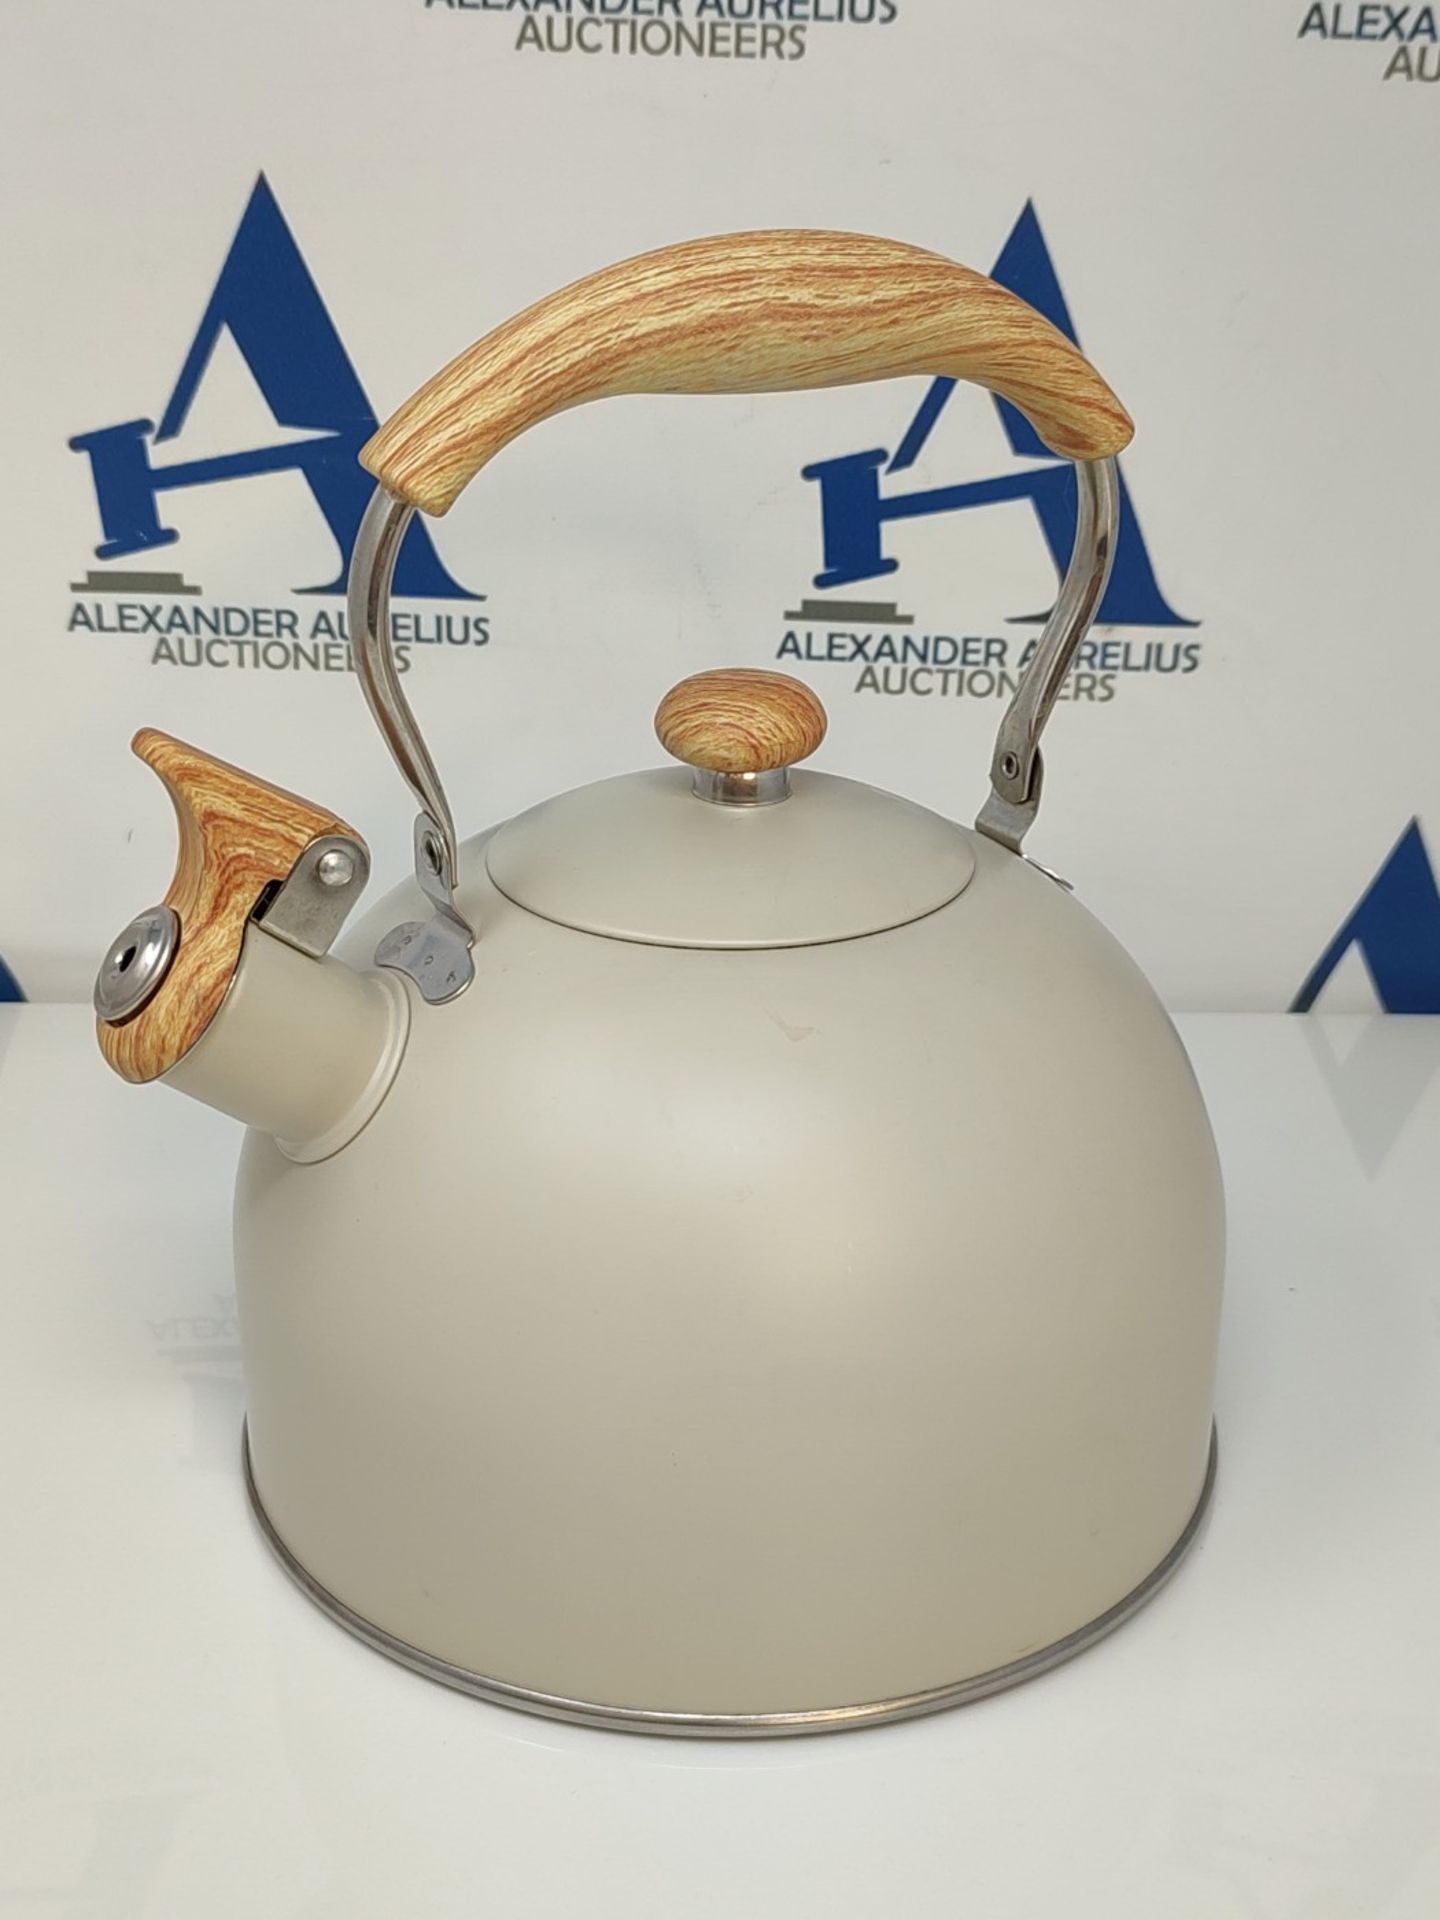 Whistling Kettle, 2.5L Stainless Steel Stove Top Whistling Tea Kettle with Wood Grain - Image 3 of 3